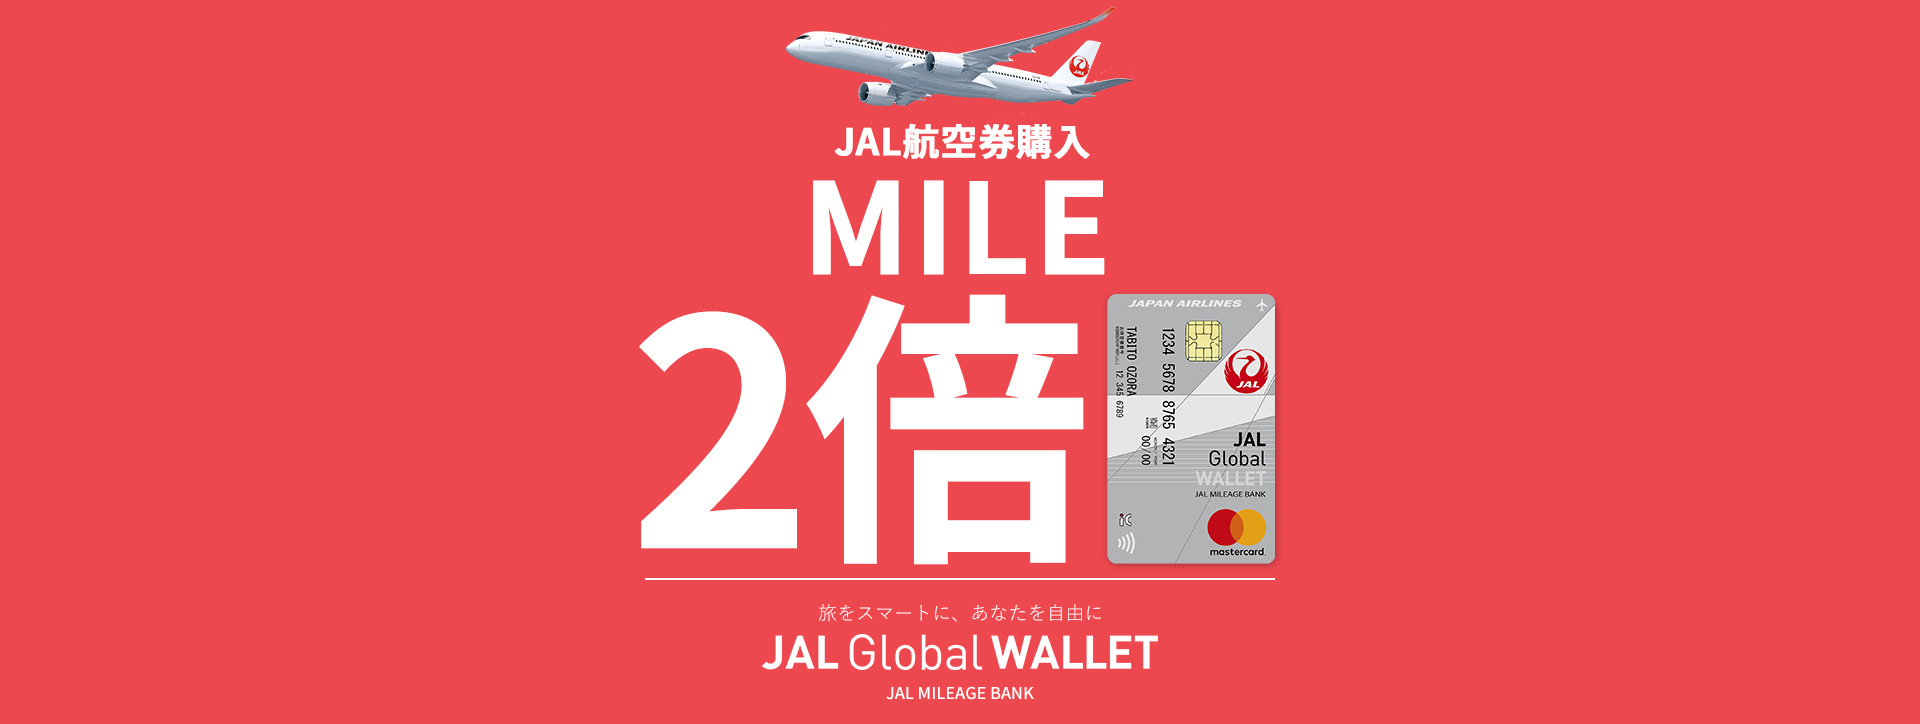 JAL航空券購入で2倍マイル 旅をスマートに、あなたを自由に JAL Global WALLET JAL MILEAGE BANK